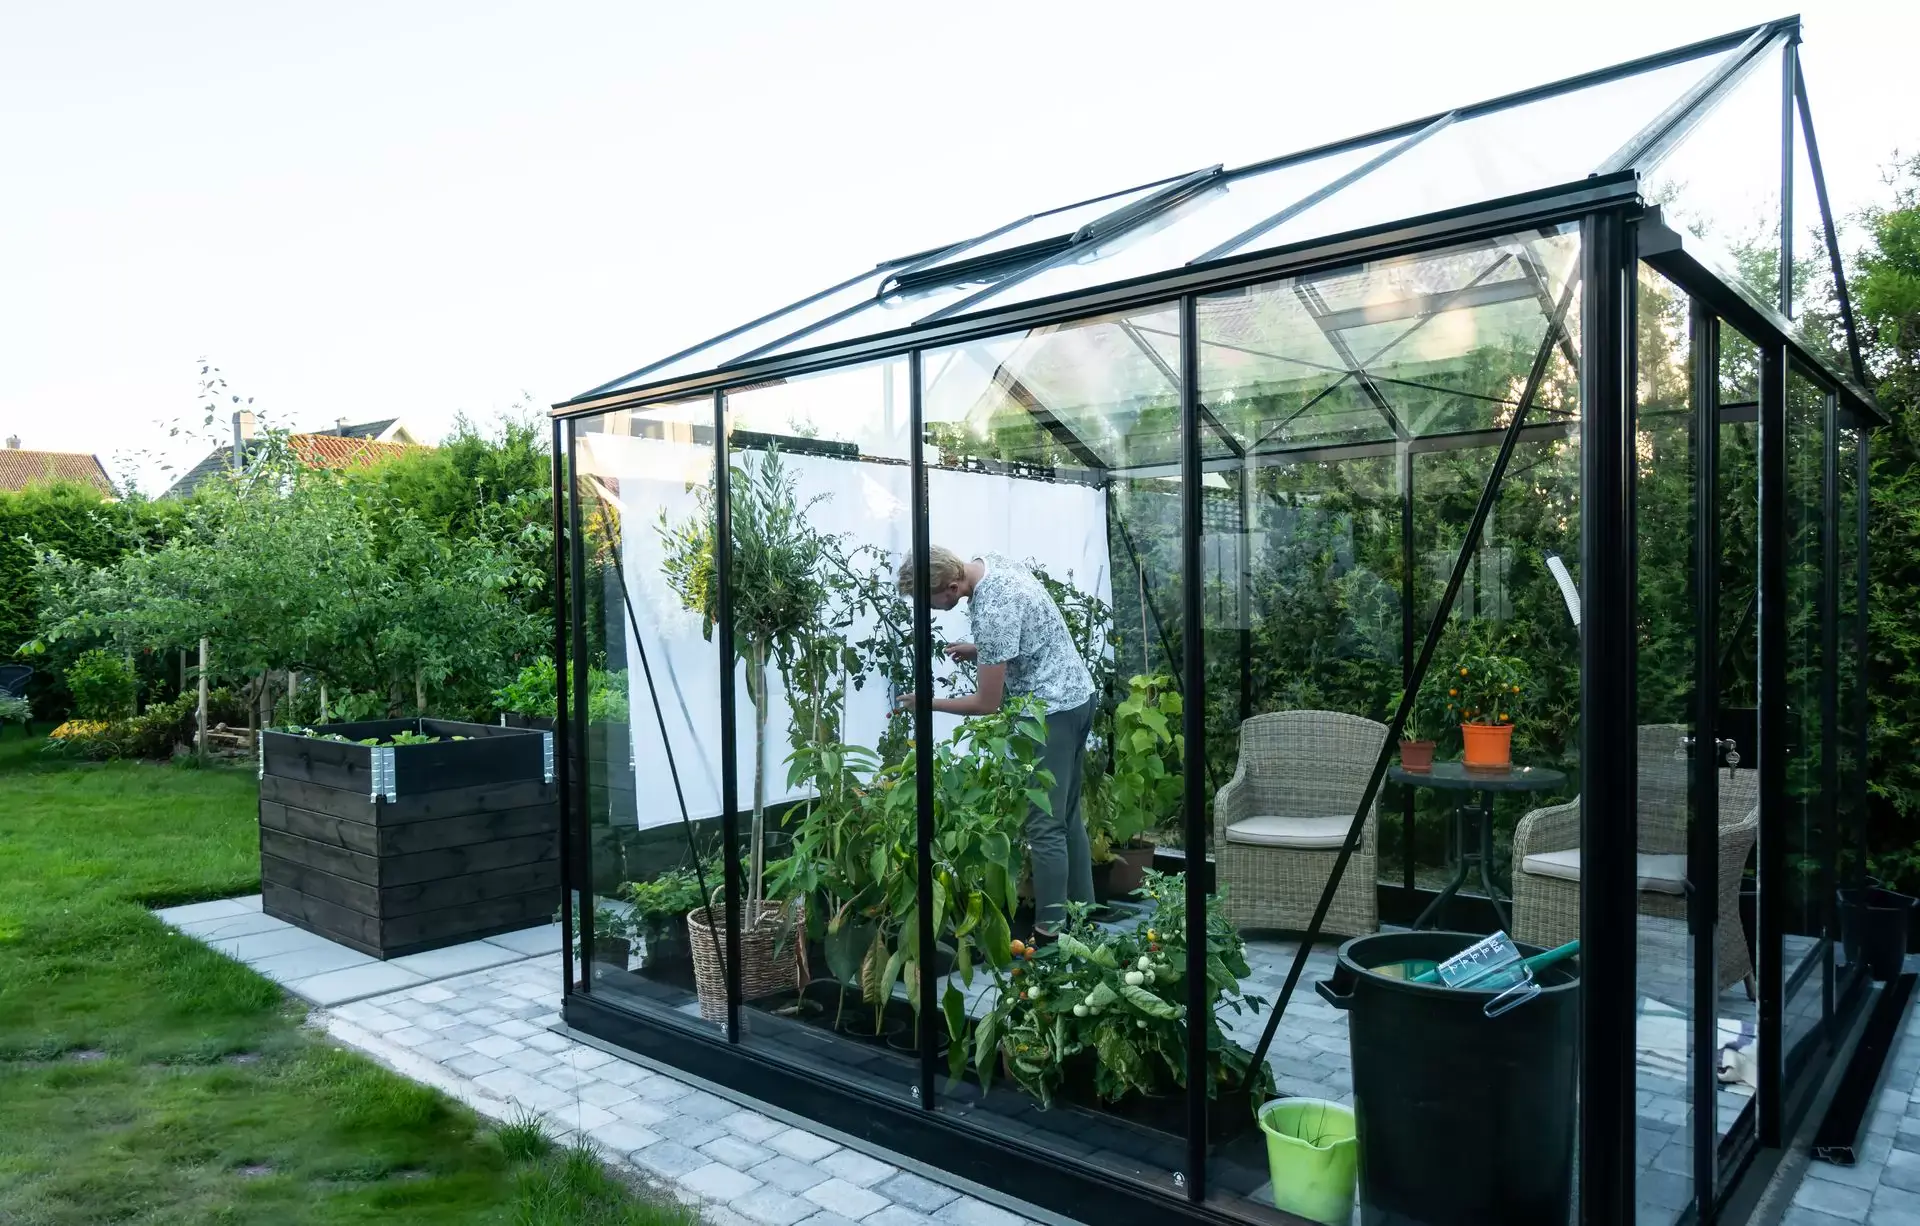 https://www.expondo.fr/inspirations/wp-content/uploads/2021/05/how-to-build-a-greenhouse.jpg